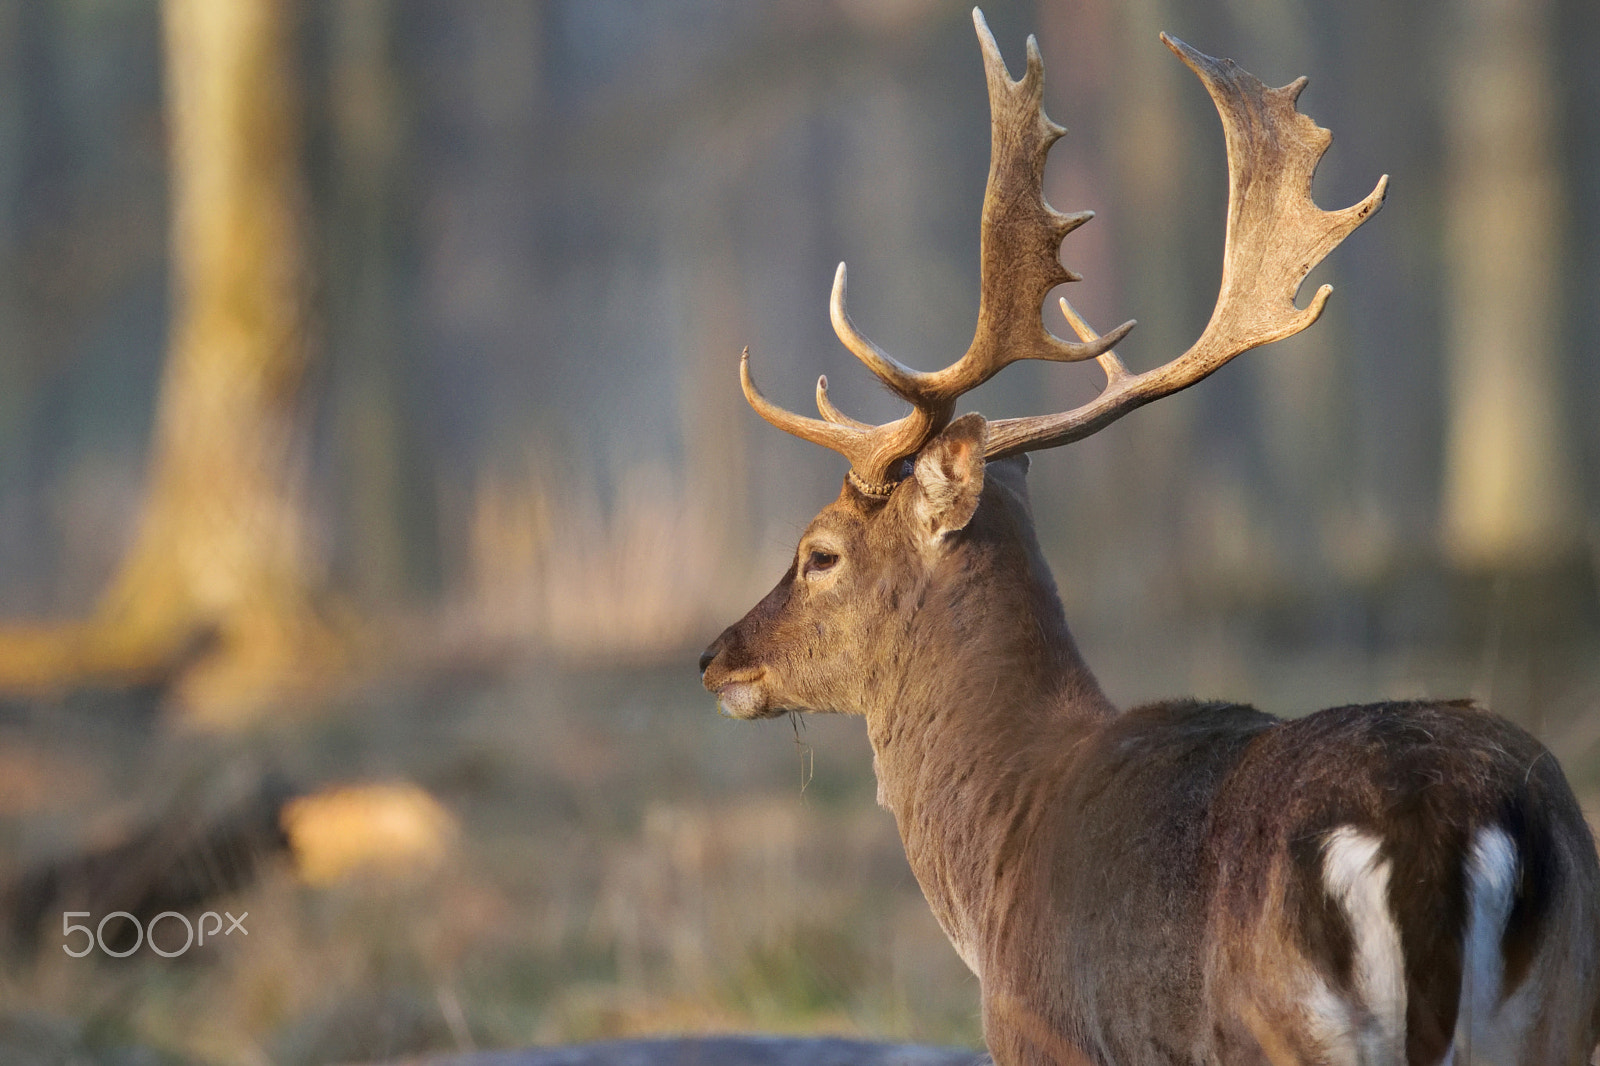 Nikon D5300 + Sigma 150-600mm F5-6.3 DG OS HSM | C sample photo. Fallow deer stag in the morning sun photography